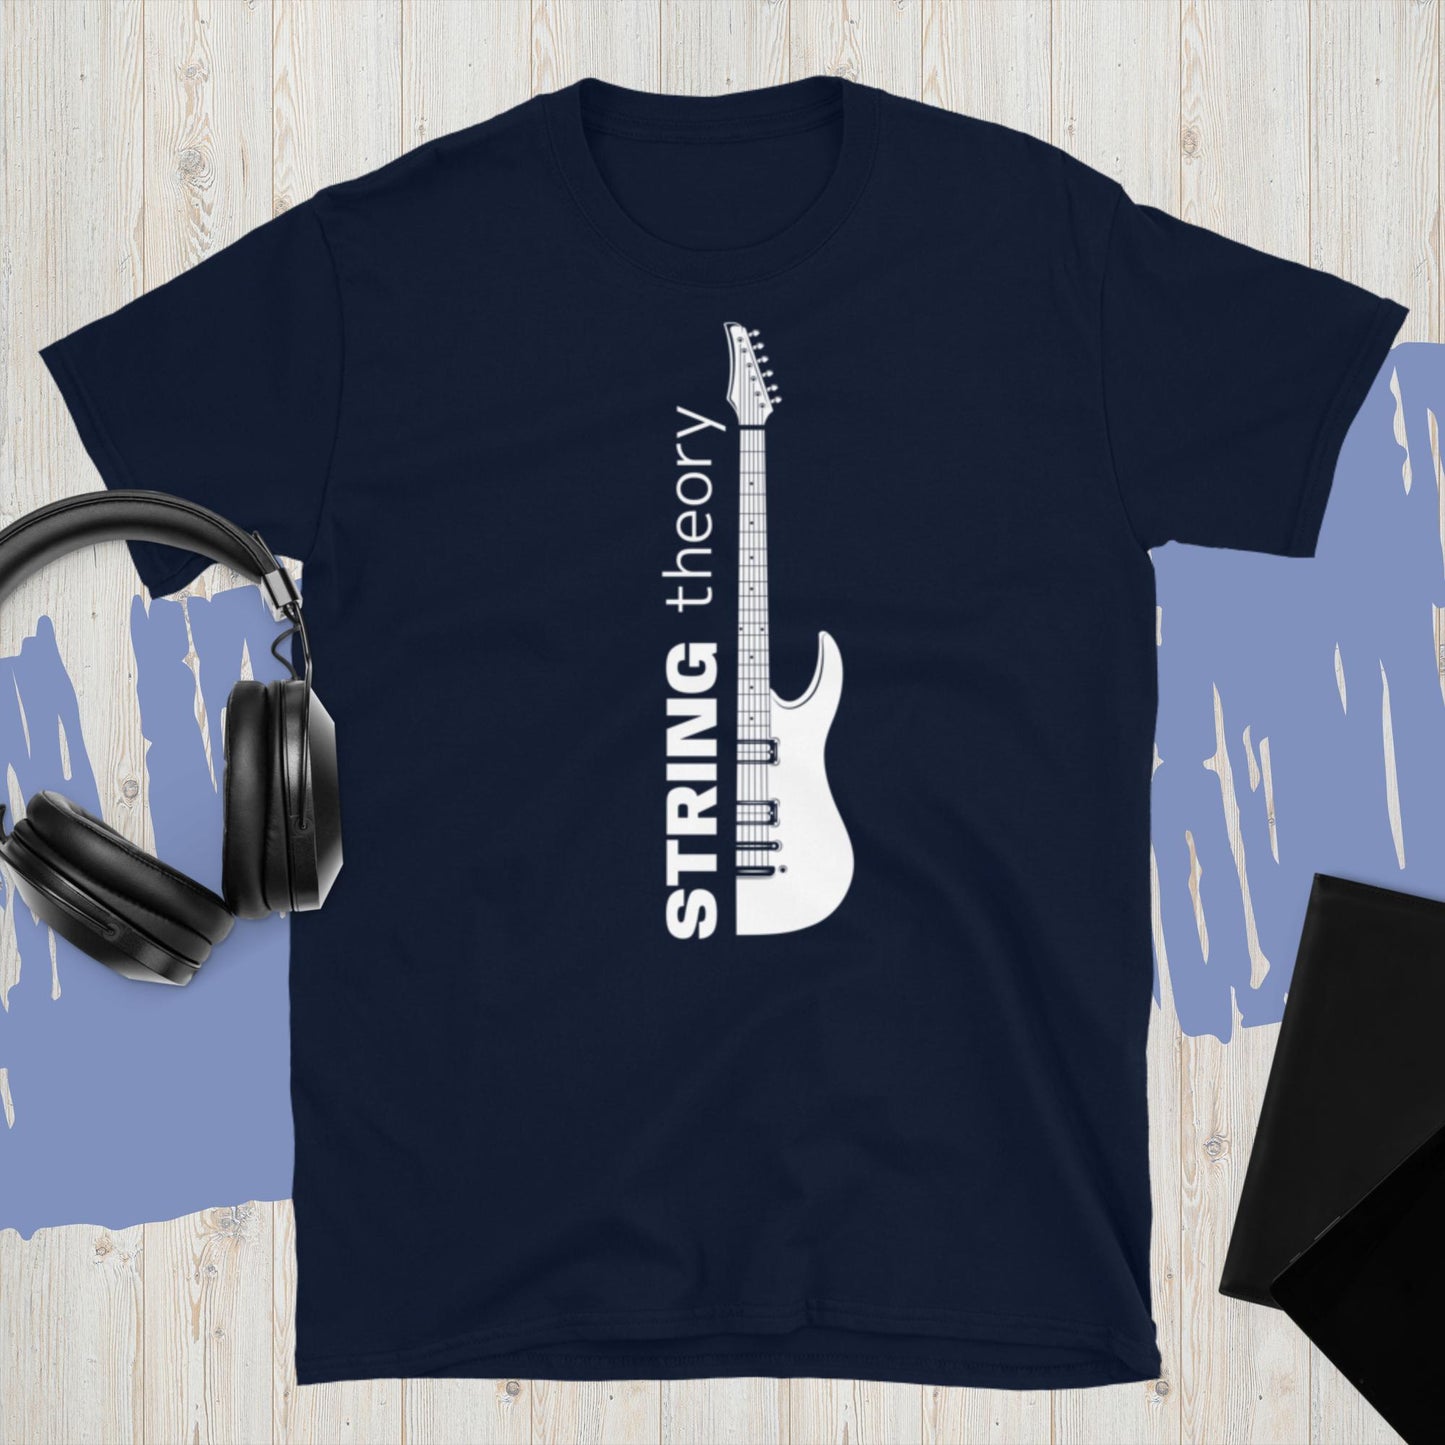 String theory. Fun T-shirt for guitarists.